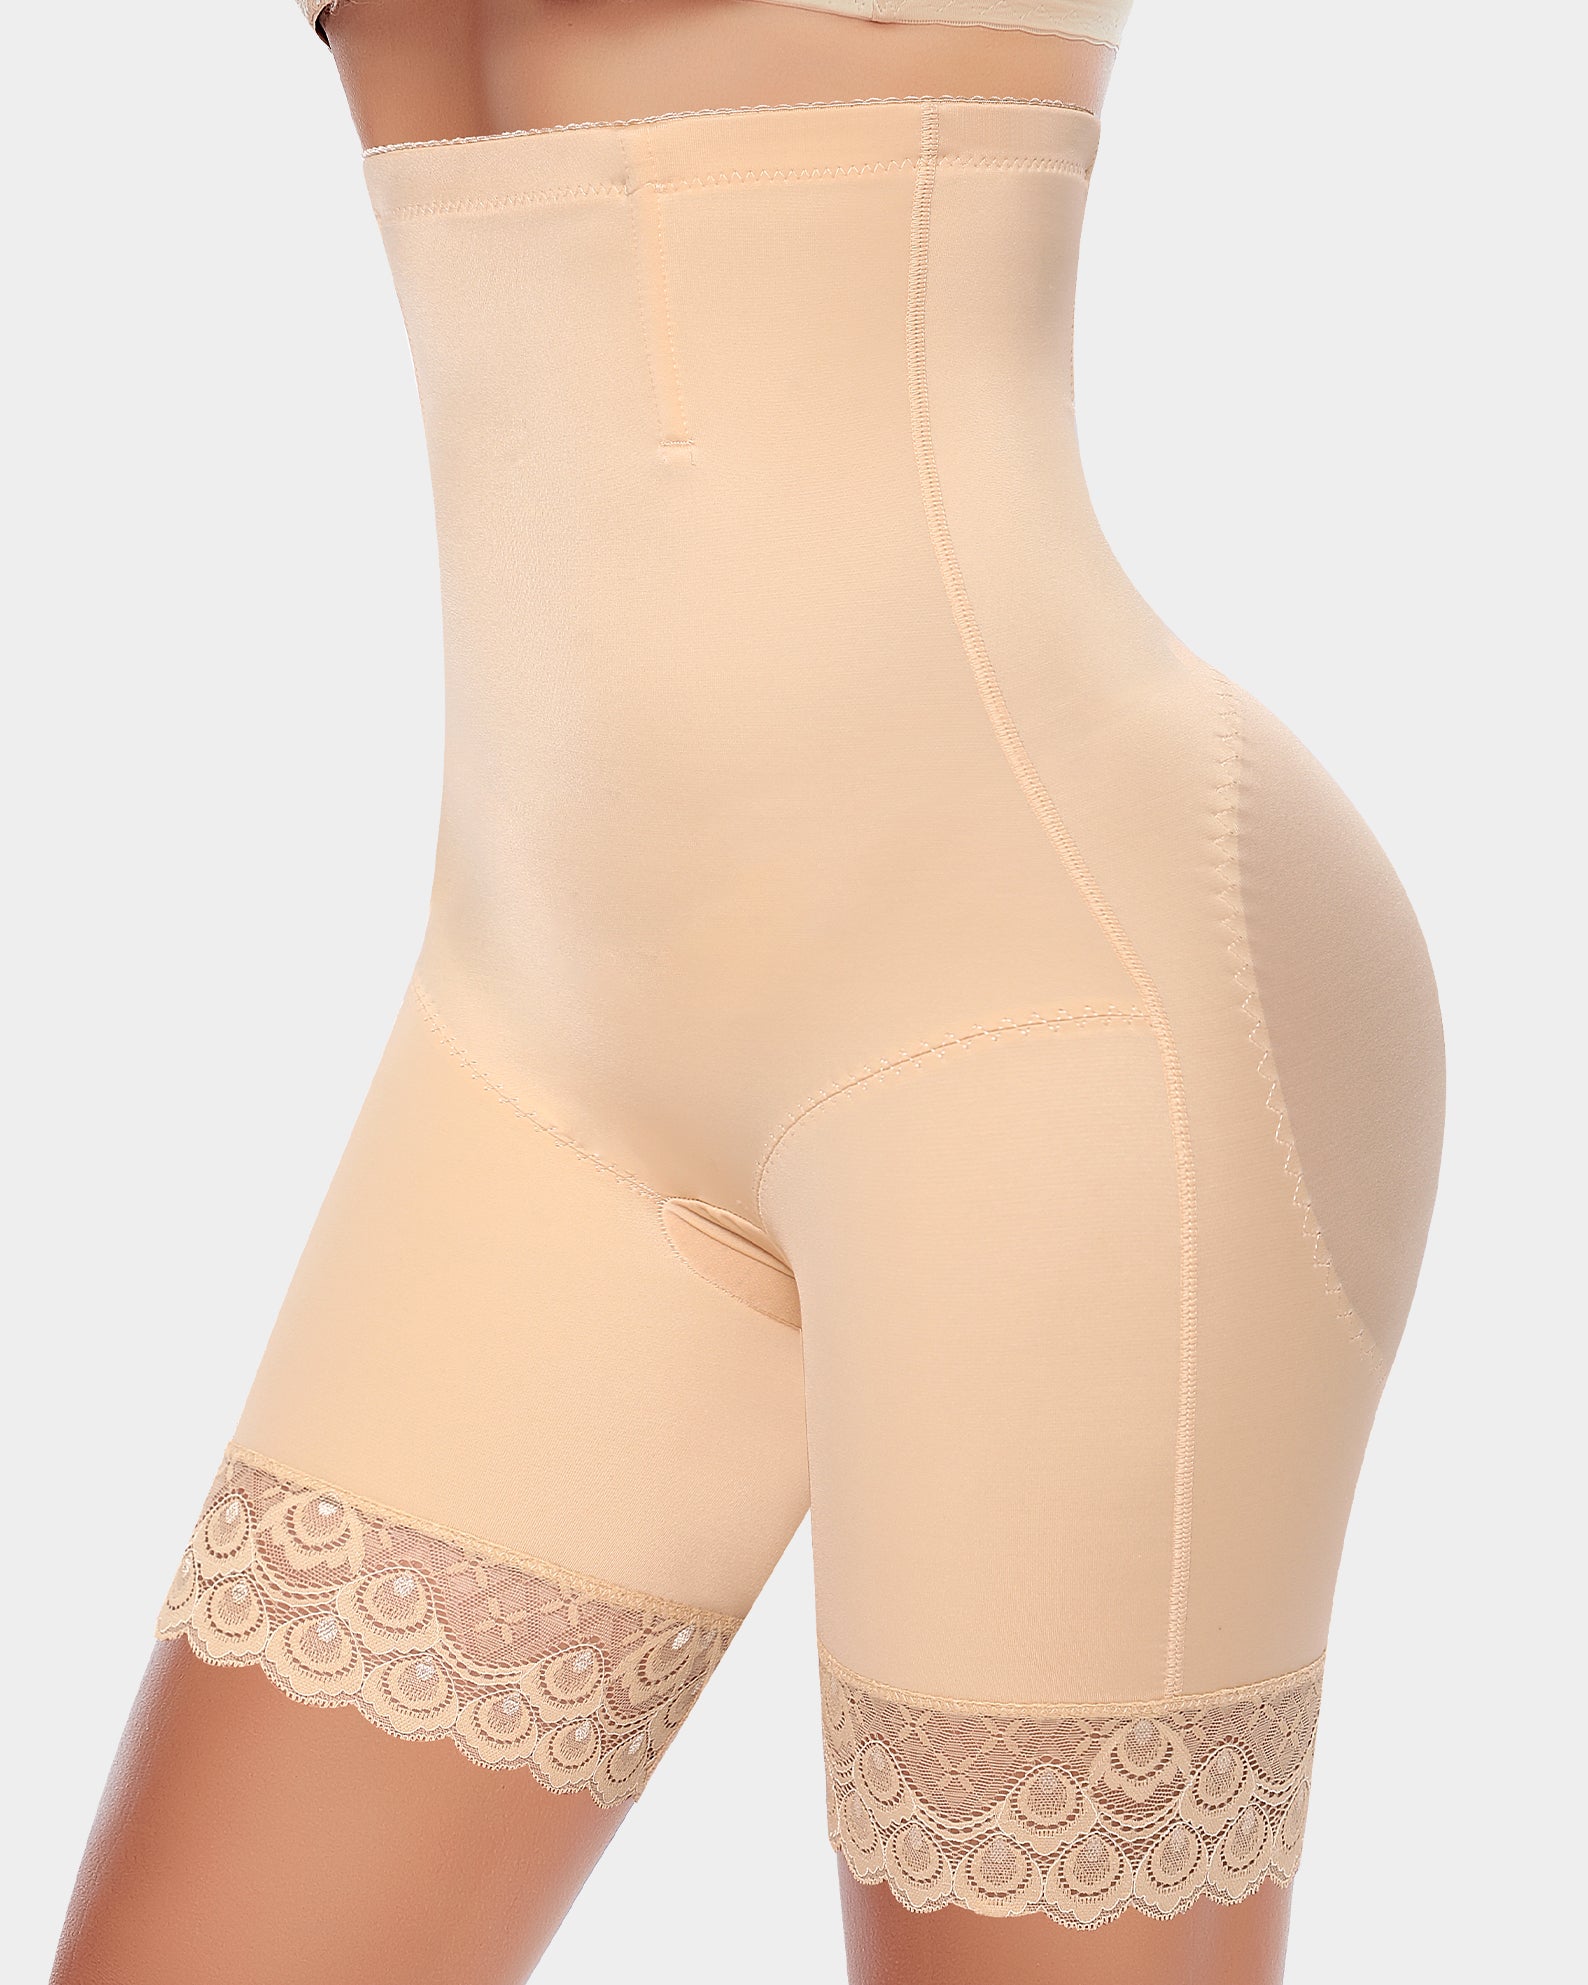 Seamless Stay-In-Place Lace Trim Shapewear Shorts